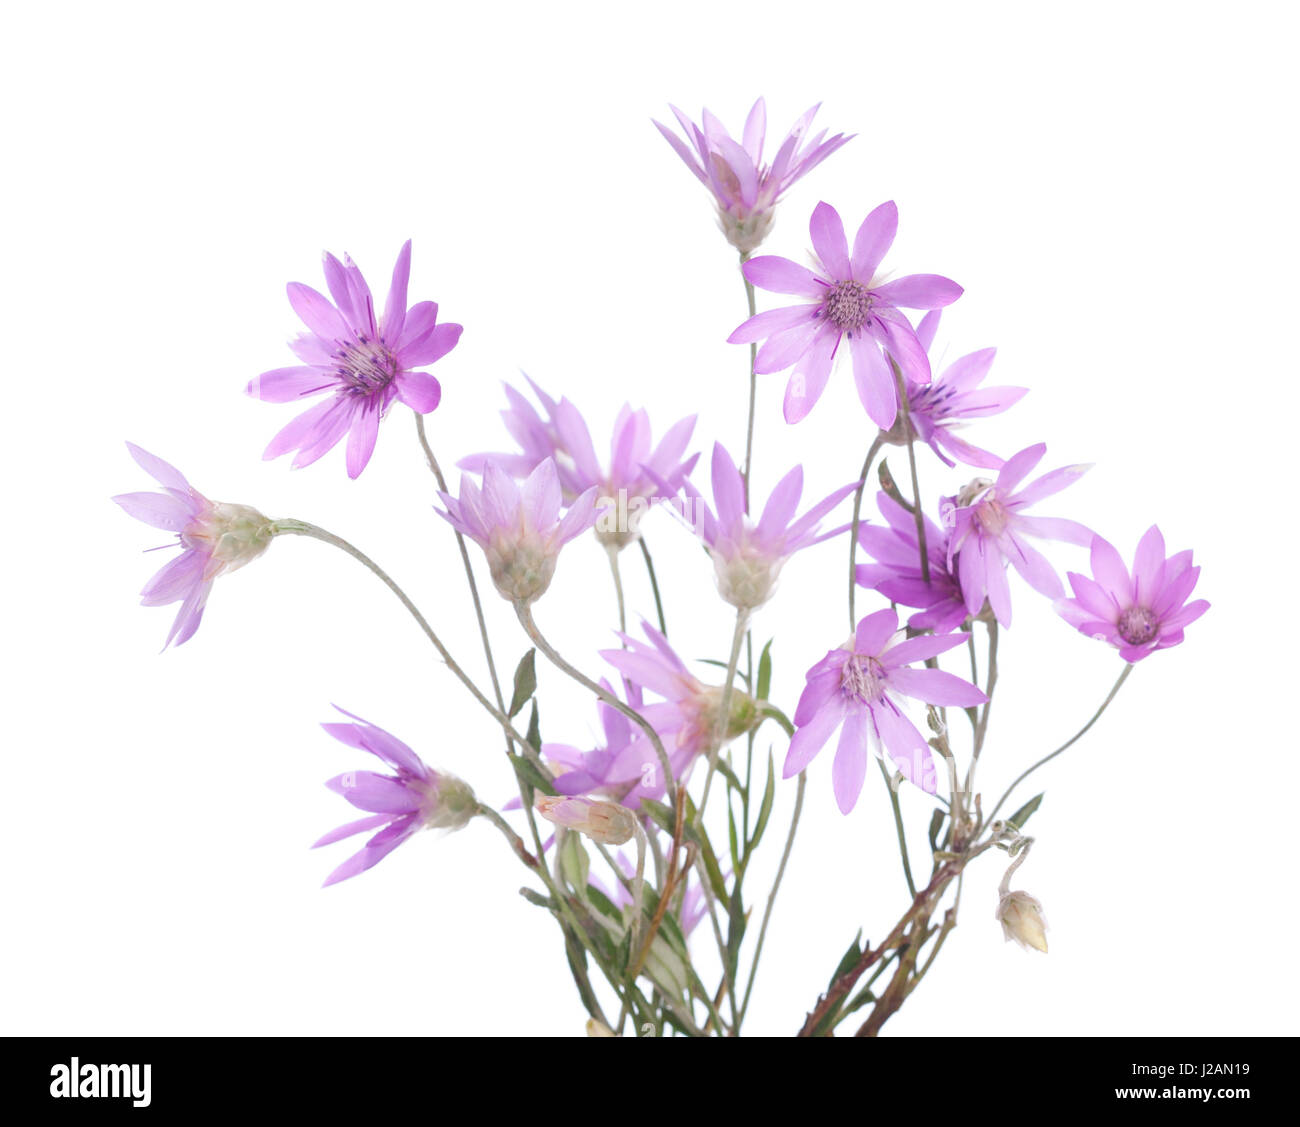 Bunch of   flowering plants  (Immortelle)  isolated on white background.   Xeranthemum annuum. Shallow depth of field. Selective focus Stock Photo